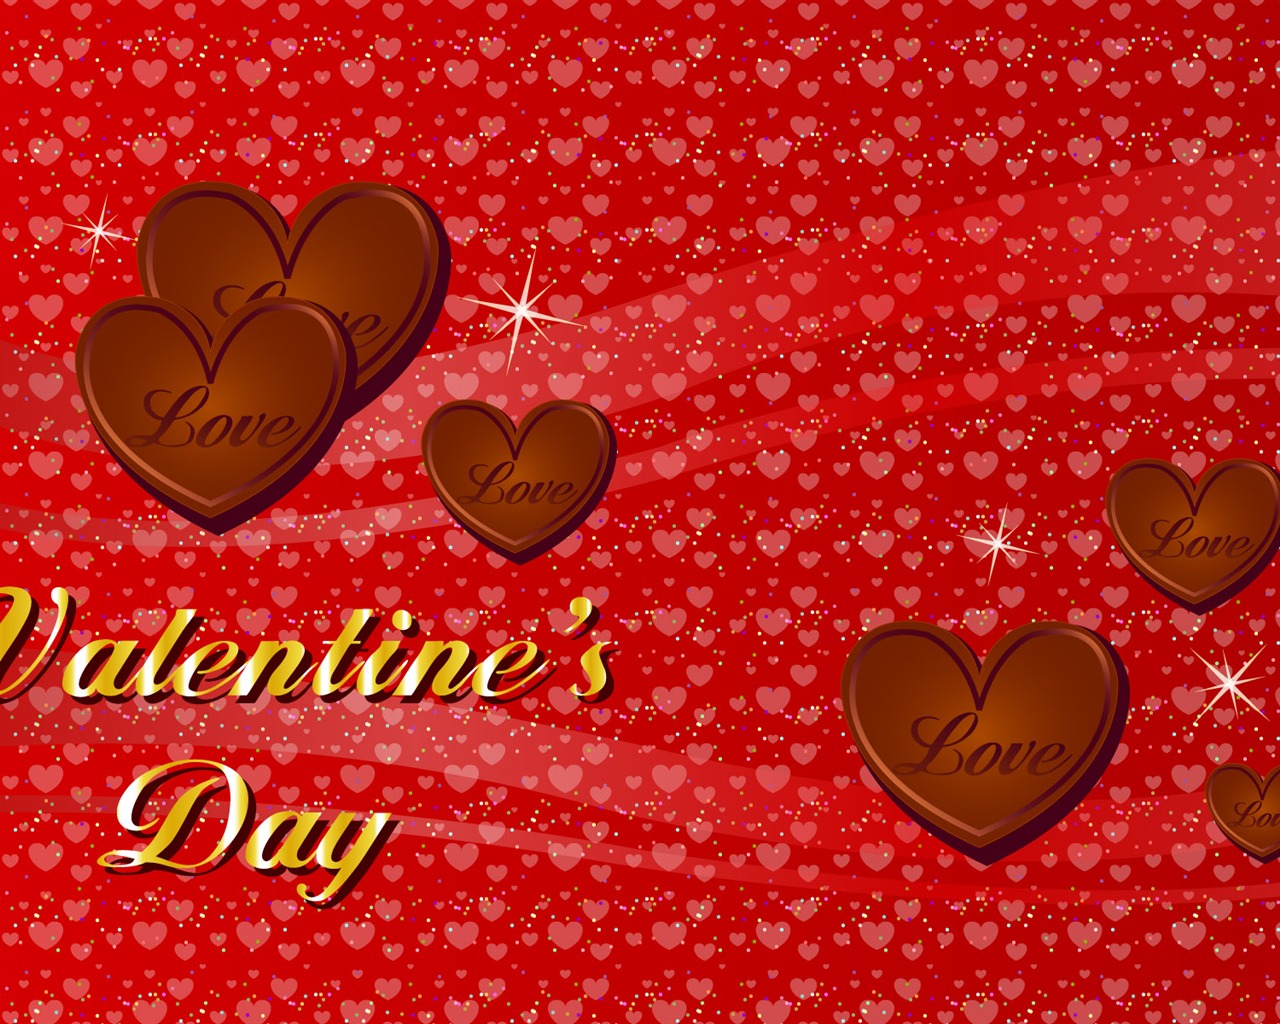 Valentine's Day Theme Wallpapers (1) #14 - 1280x1024